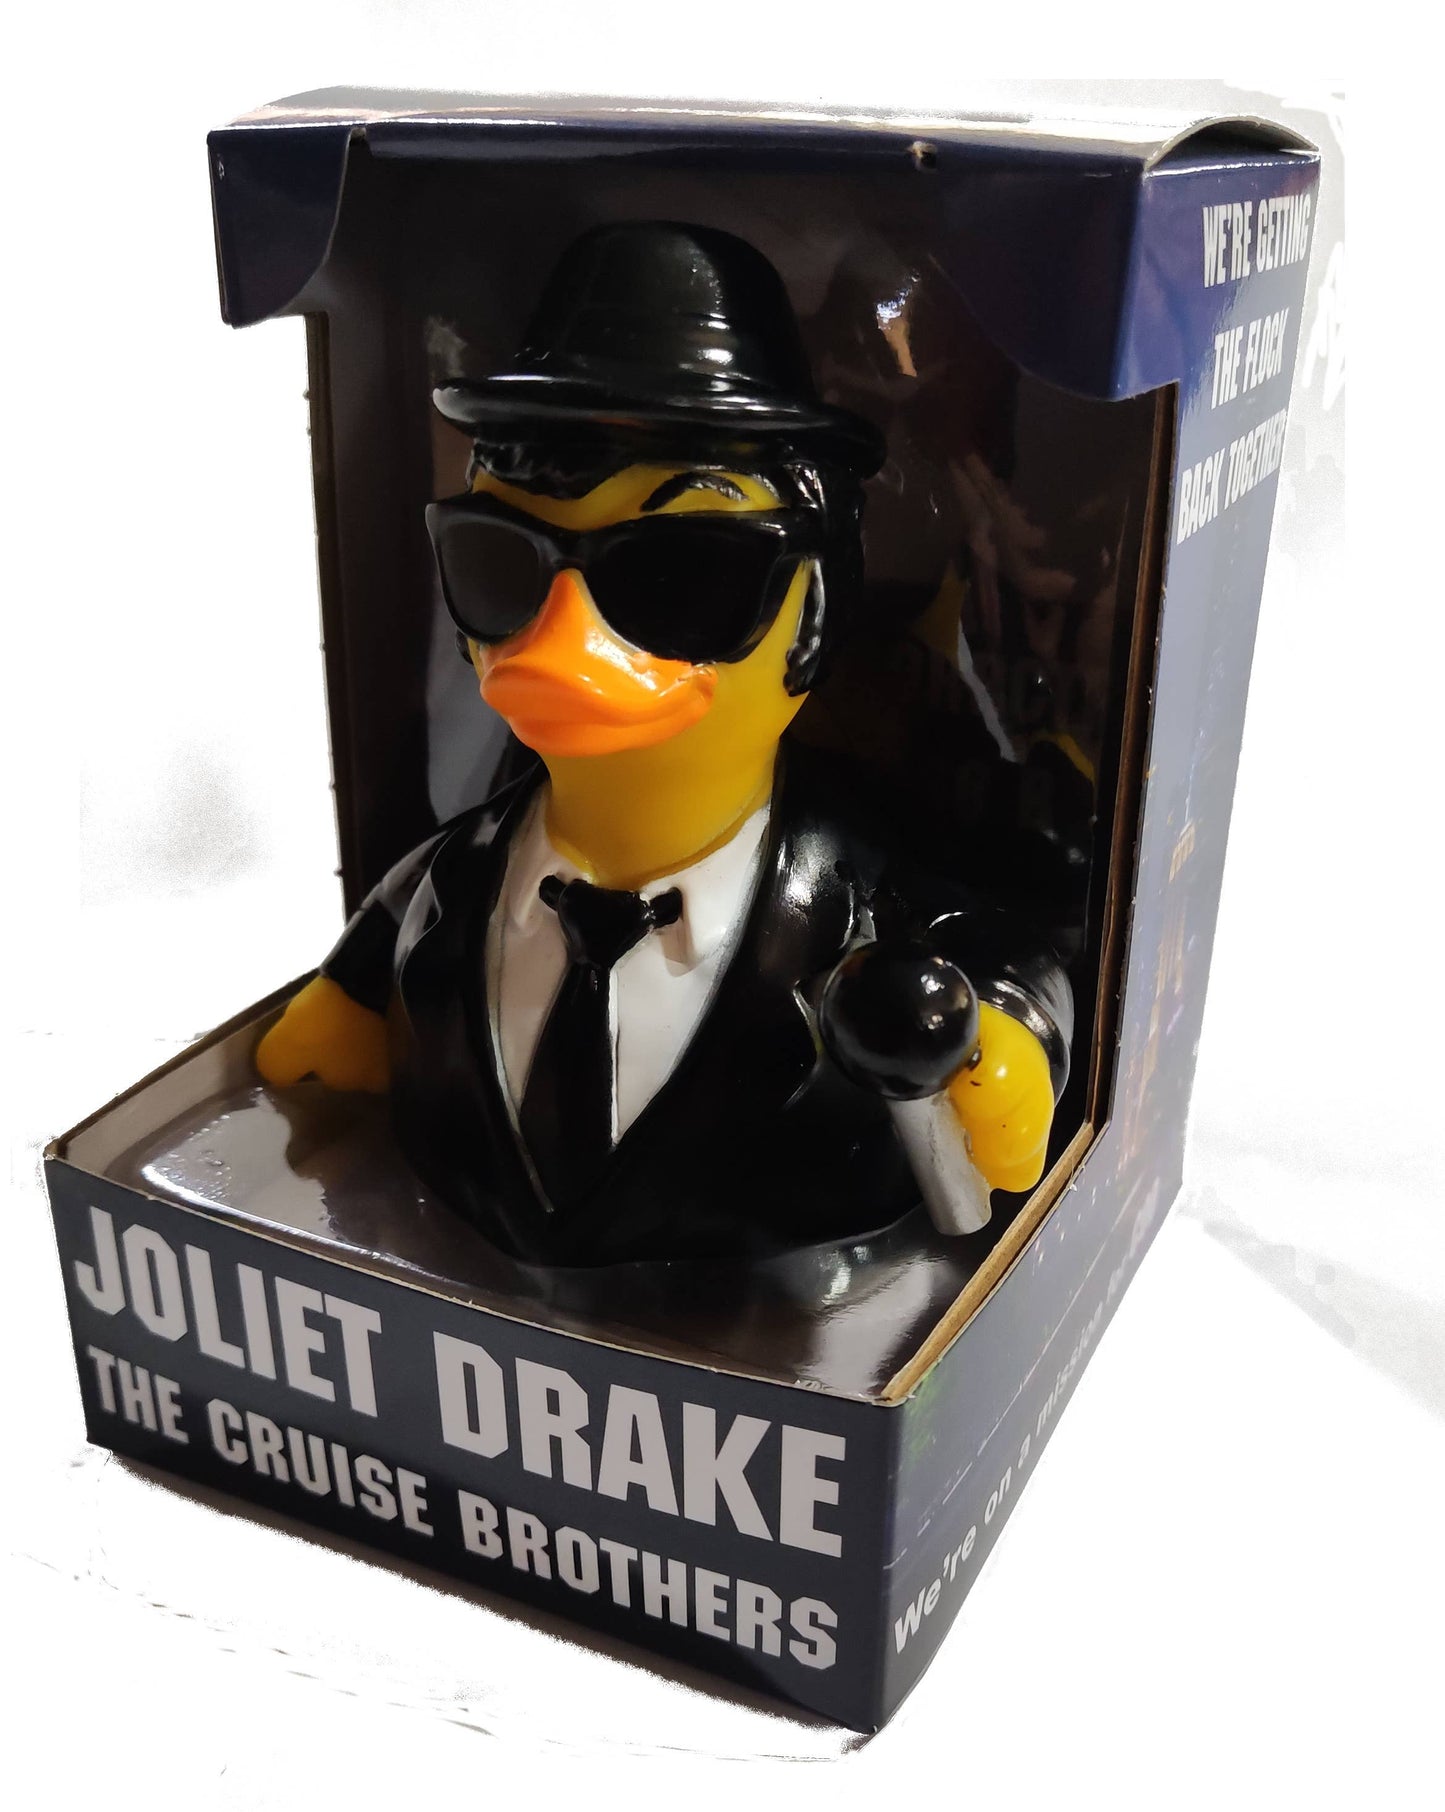 Joliet Drake - The Cruise Brothers Blues Brothers Parody Rubber Duck